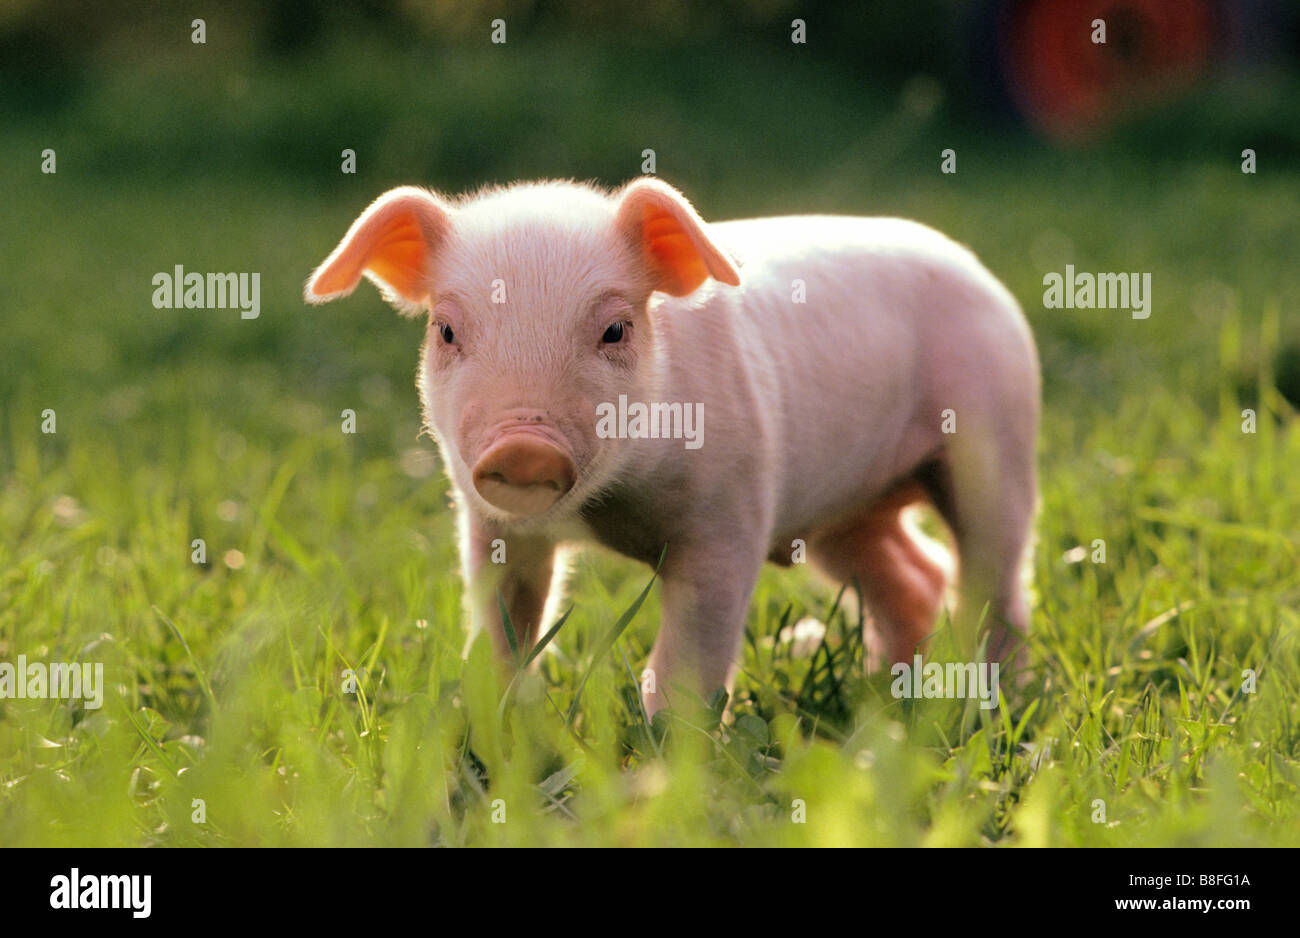 Domestic Pig (Sus scrofa domestica), piglet standing on grass Stock Photo